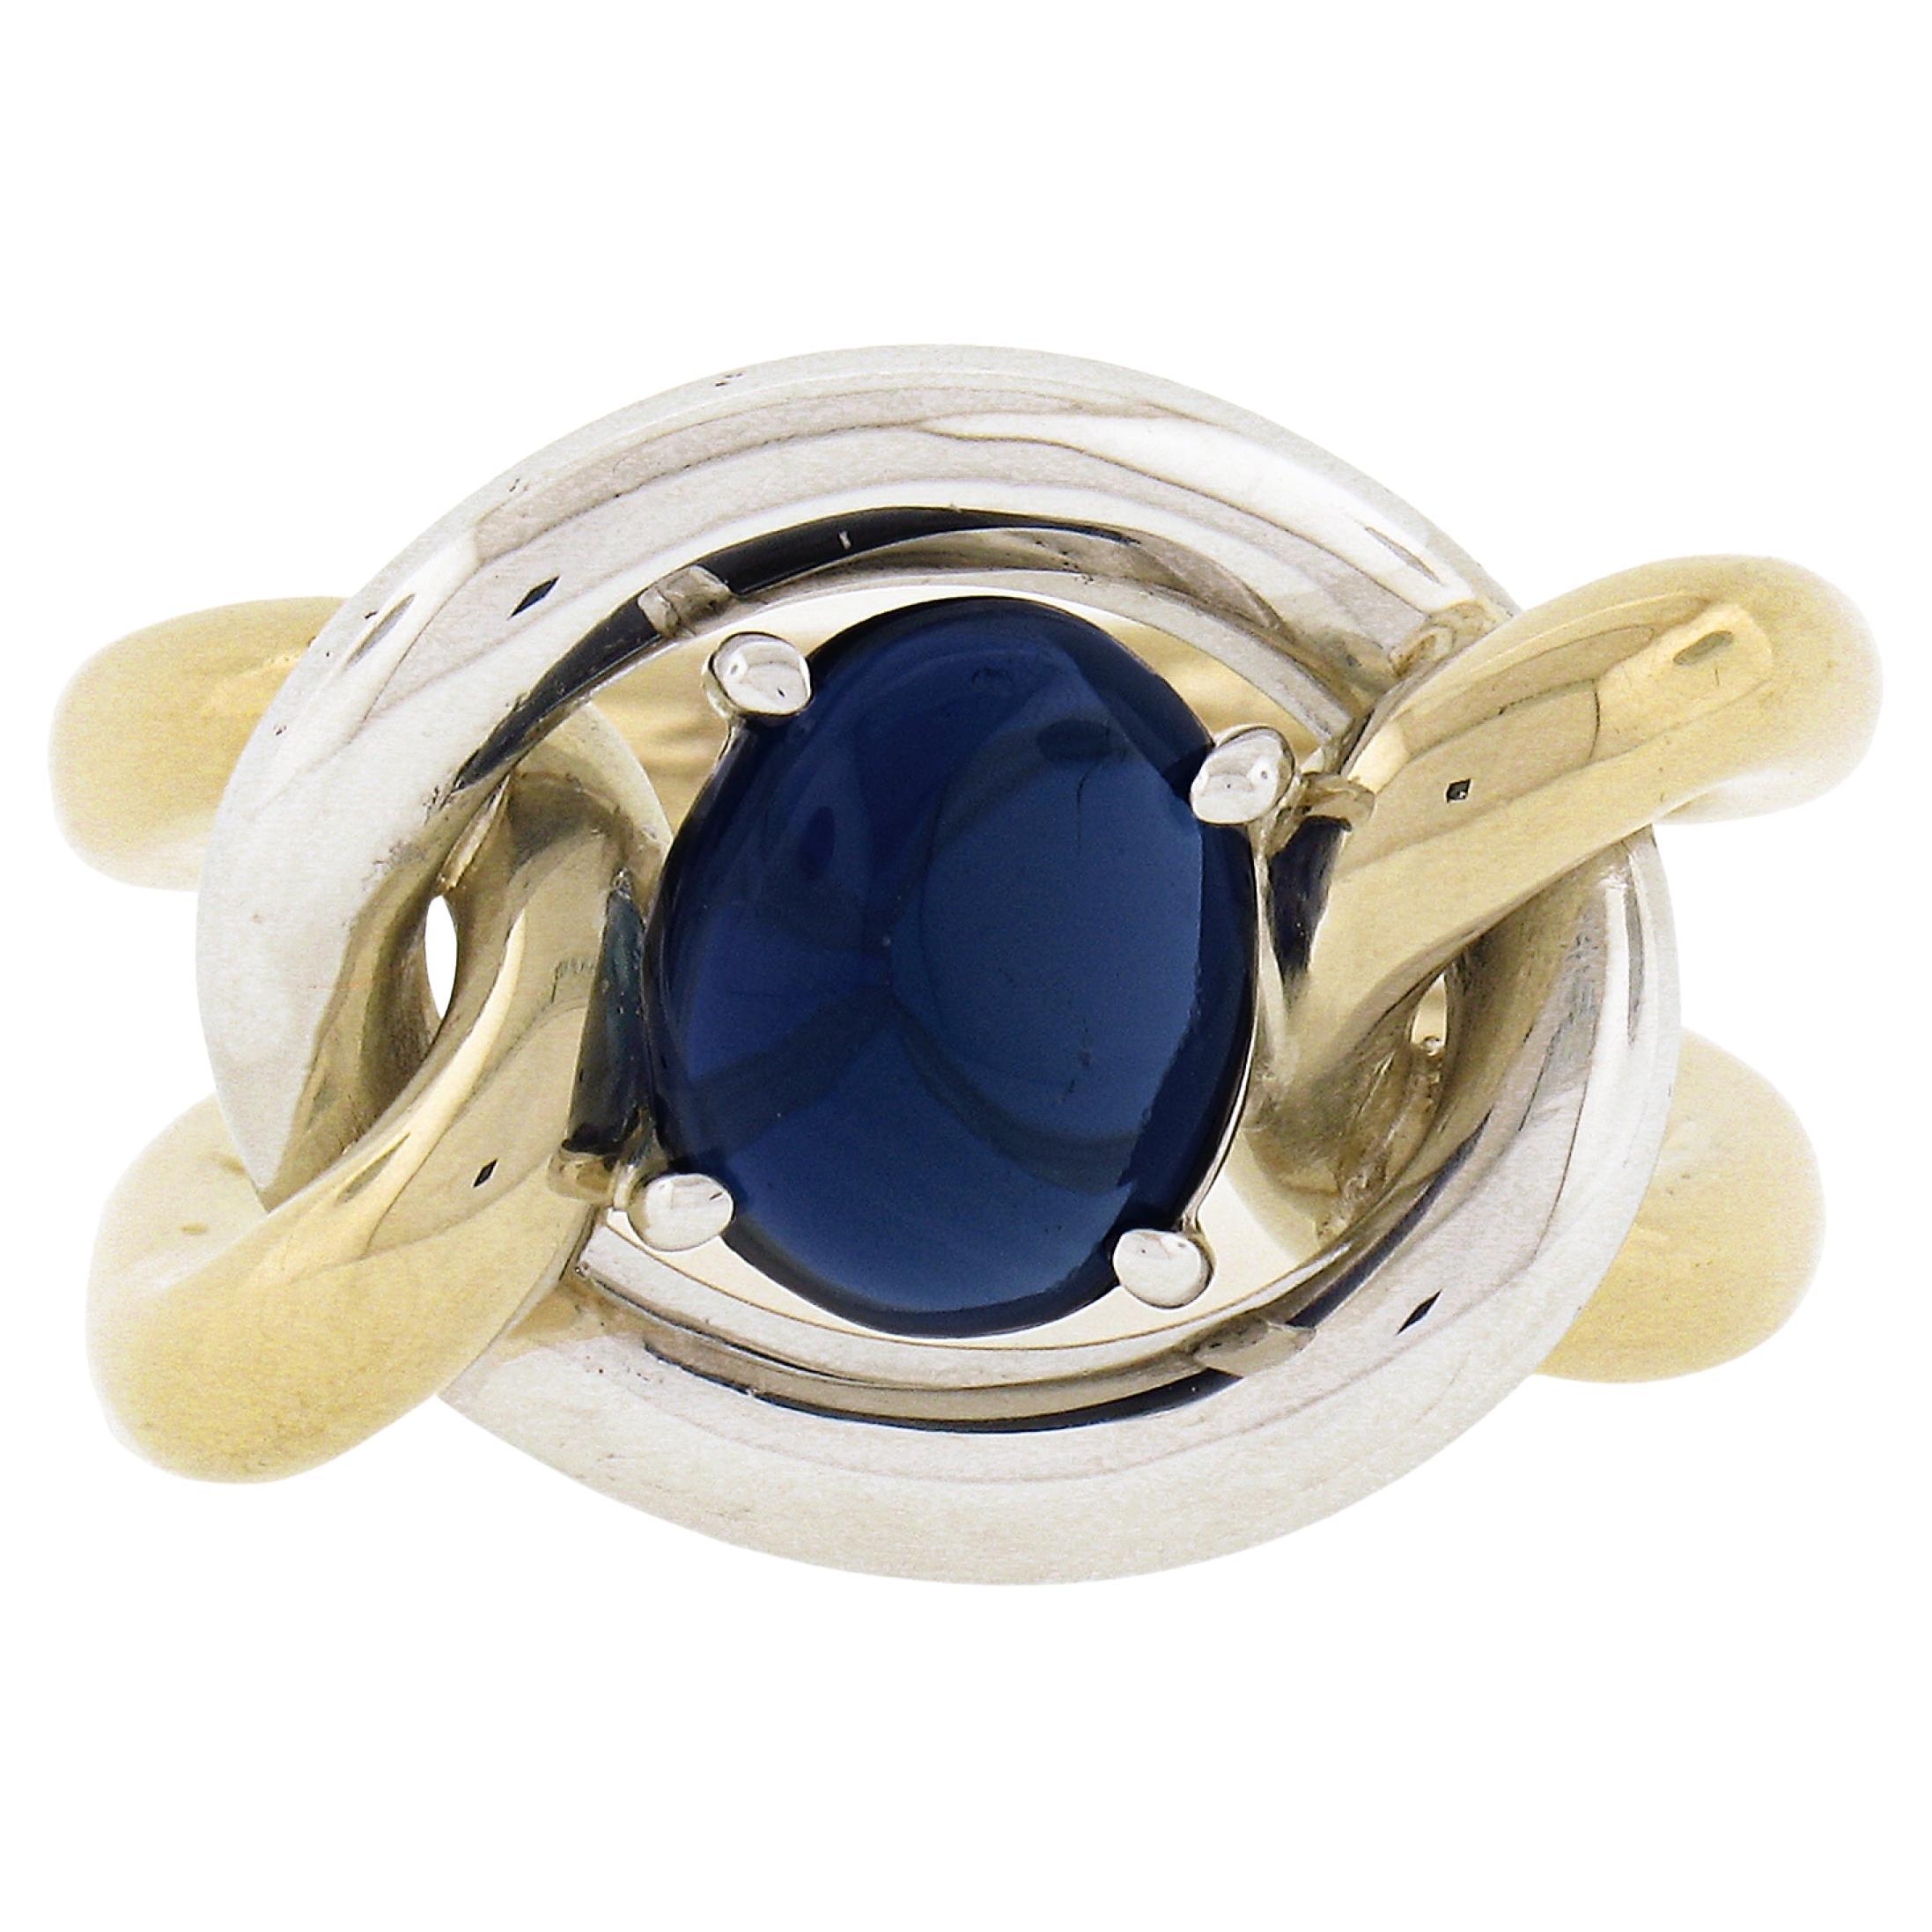 Handmade 18K TT Gold GIA No Heat Oval Cabochon Blue Sapphire Knot Cocktail Ring